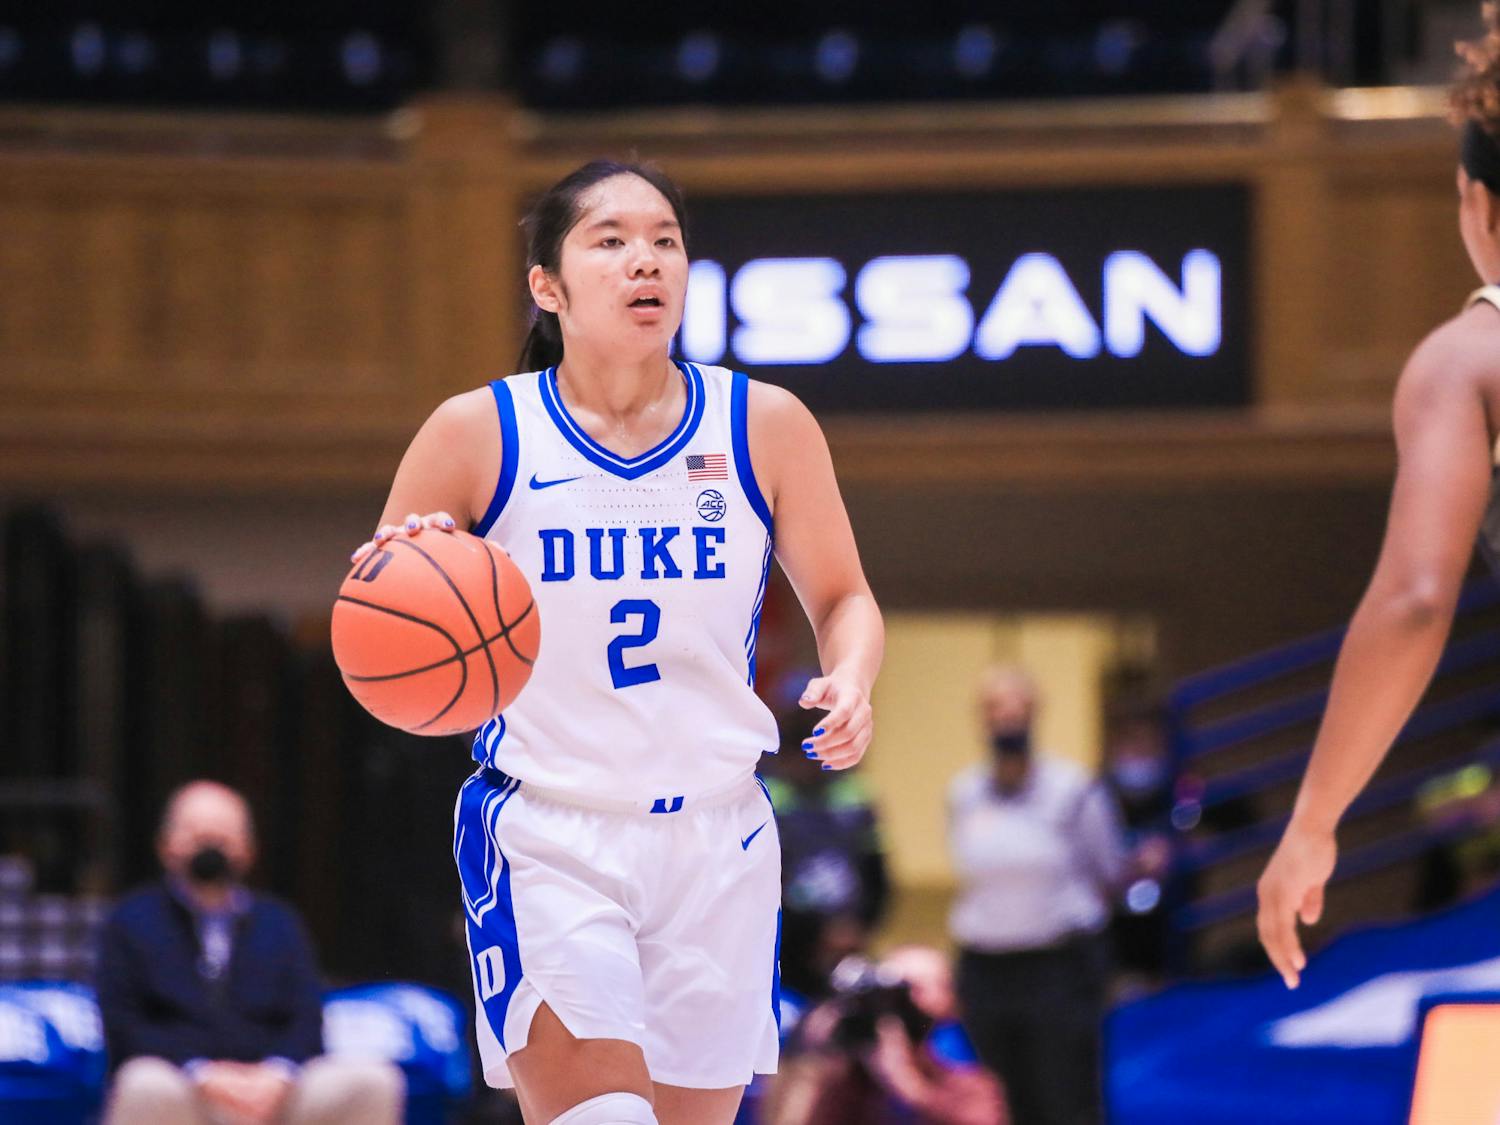 Sophomore Vanessa de Jesus will be a key part of this team's ability to play fast in transition.